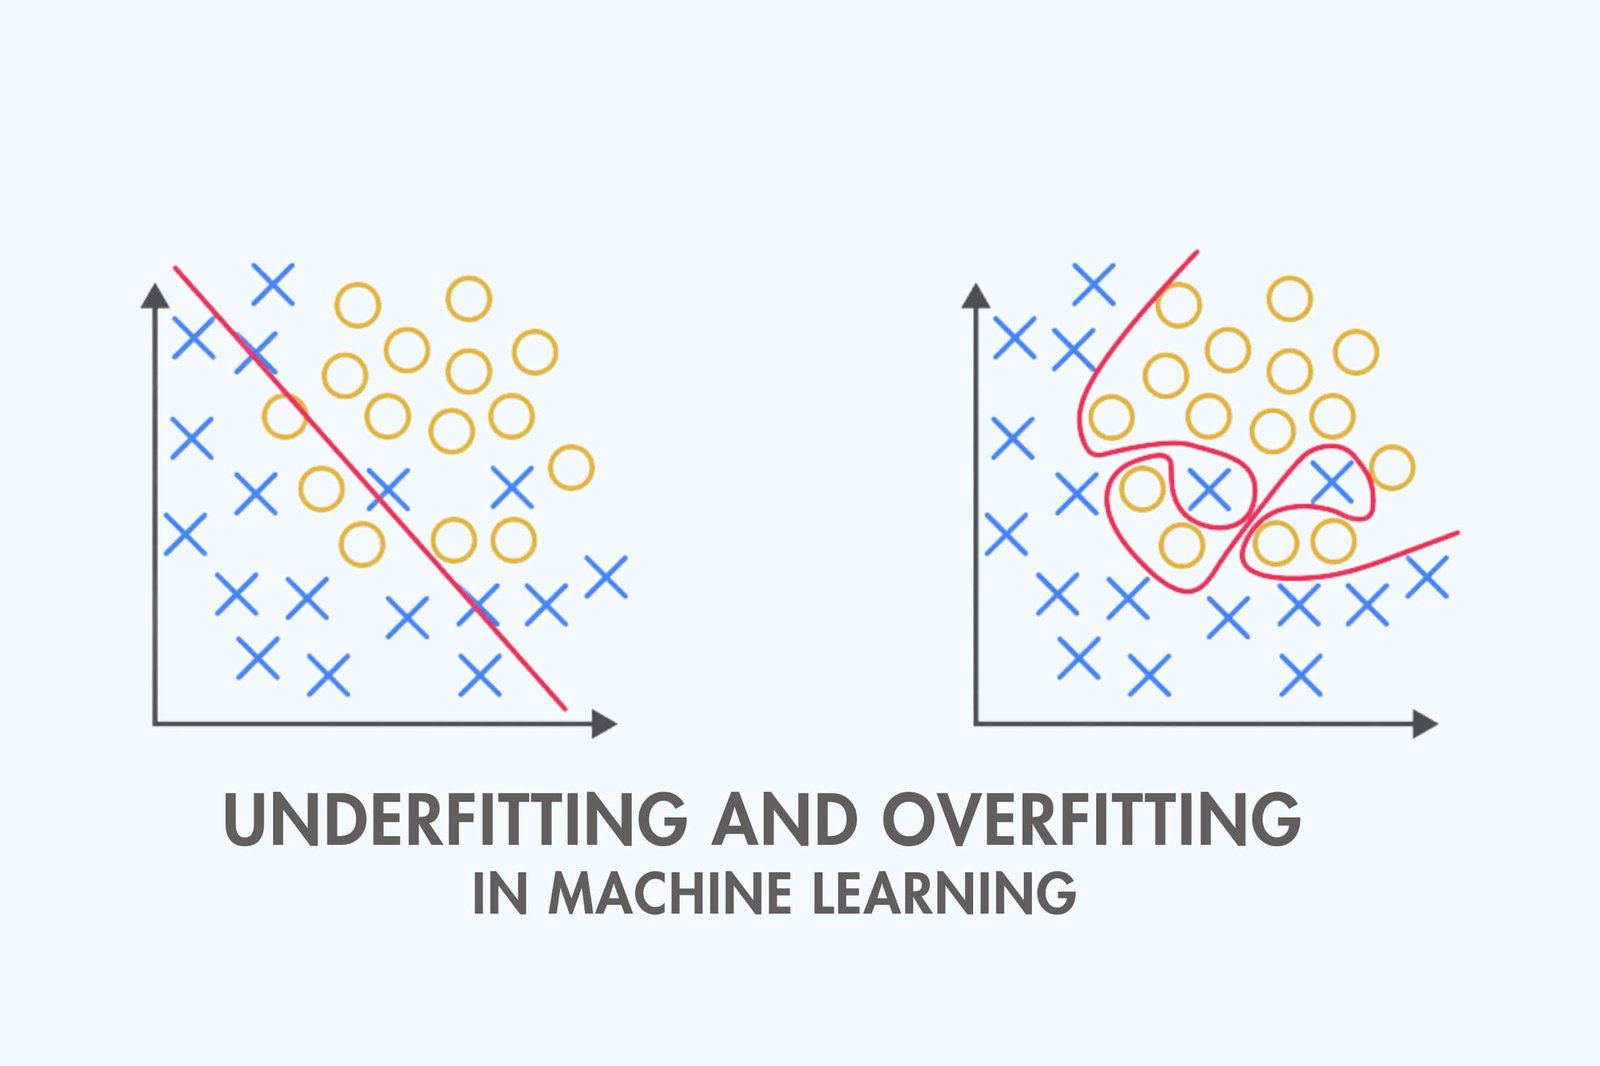 Difference Between Underfitting and Overfitting in Machine Learning